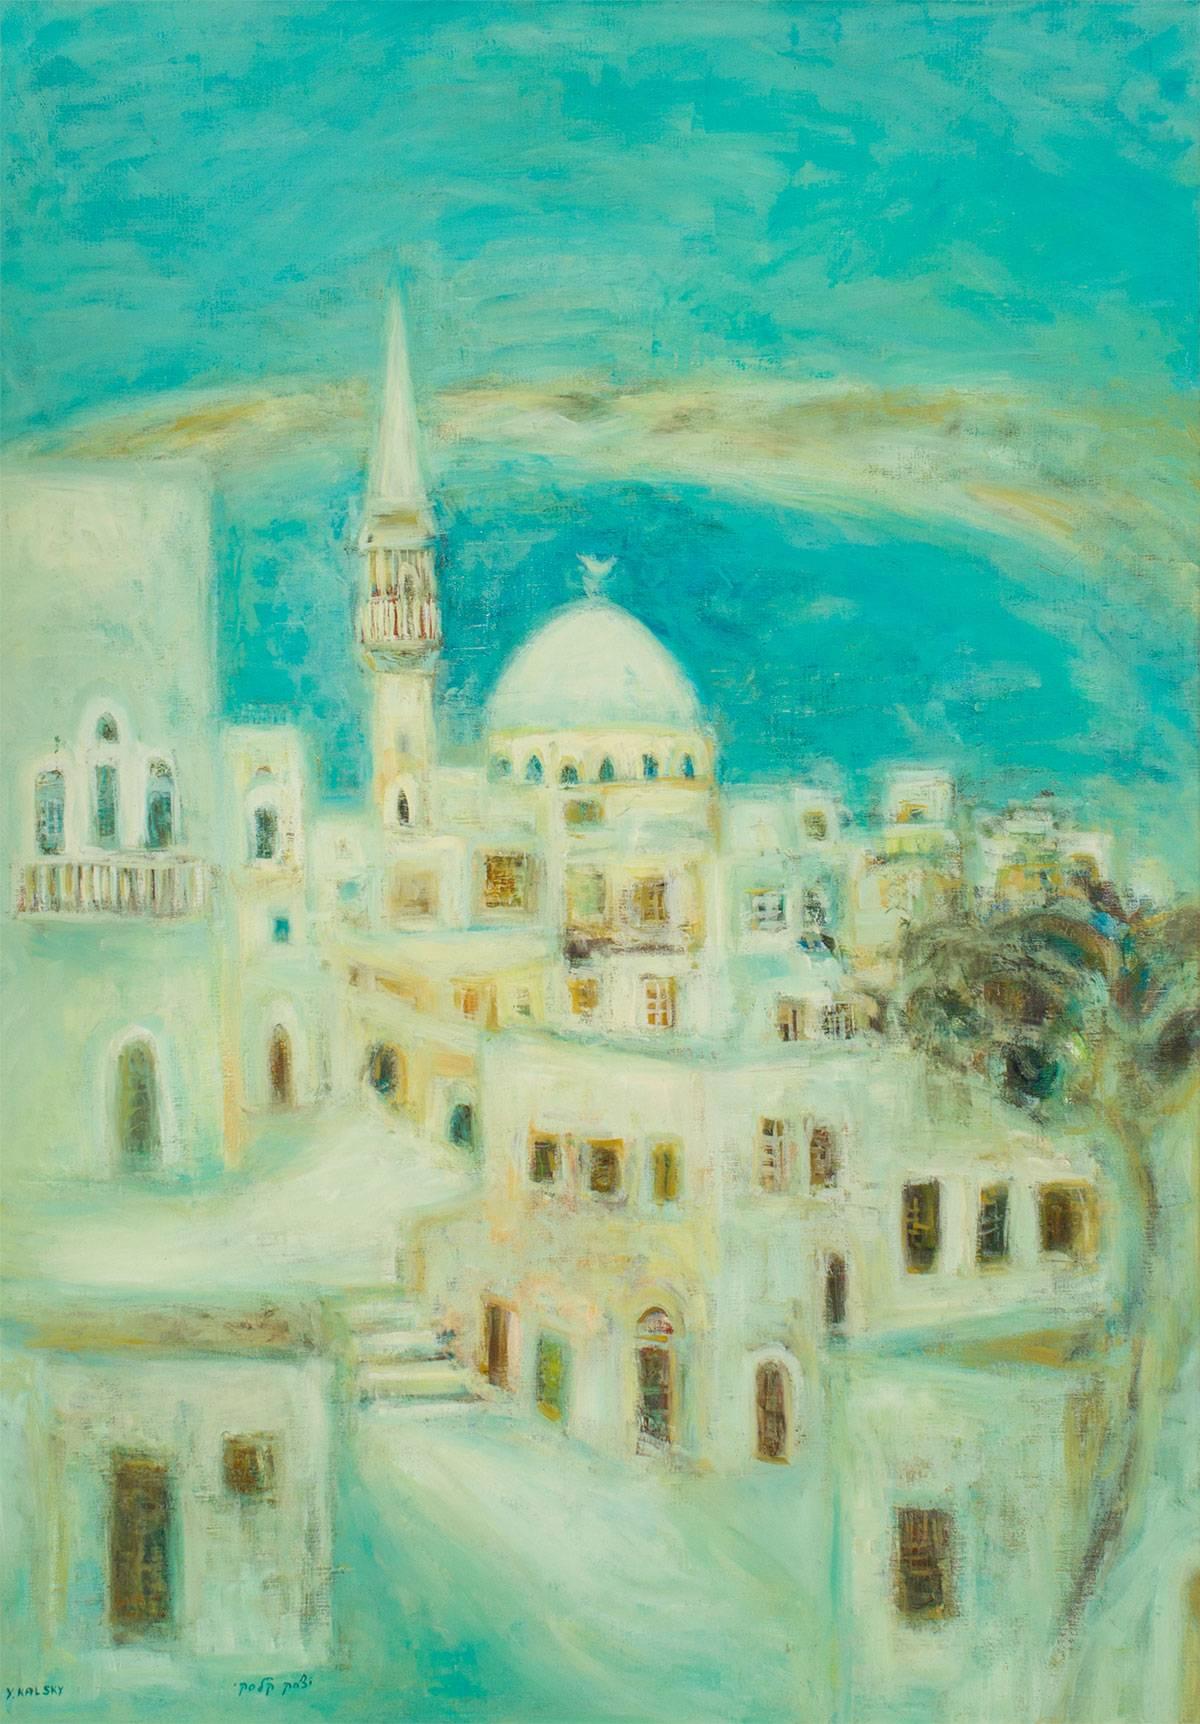 Genre: Modern
Subject: Cityscape
Medium: Oil
Surface: Canvas
Country: Israel
Dimensions: 36 1/4